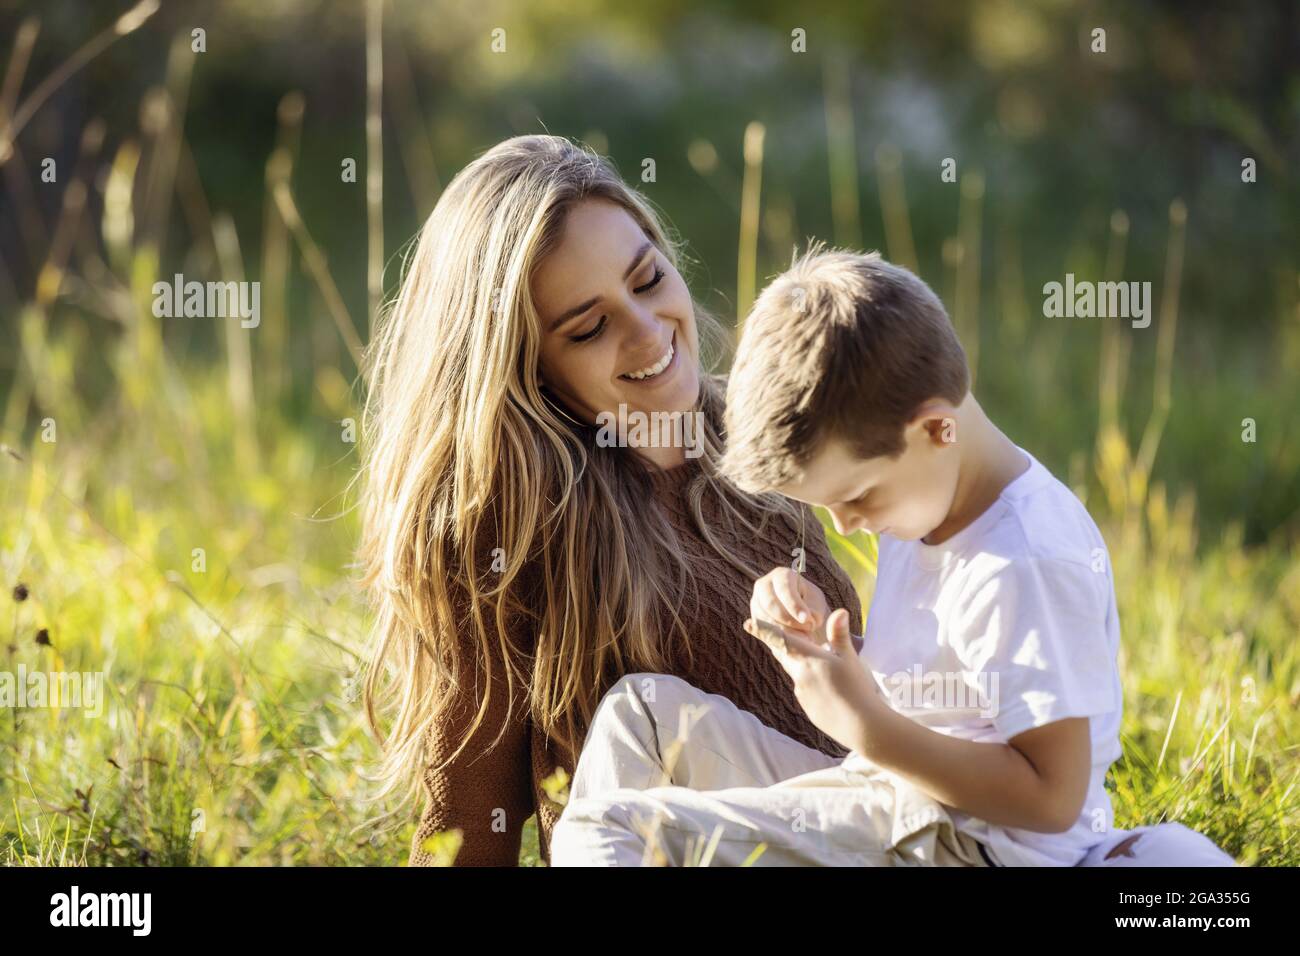 A mother spending quality time with her young son, outdoors in a city park; Edmonton, Alberta, Canada Stock Photo